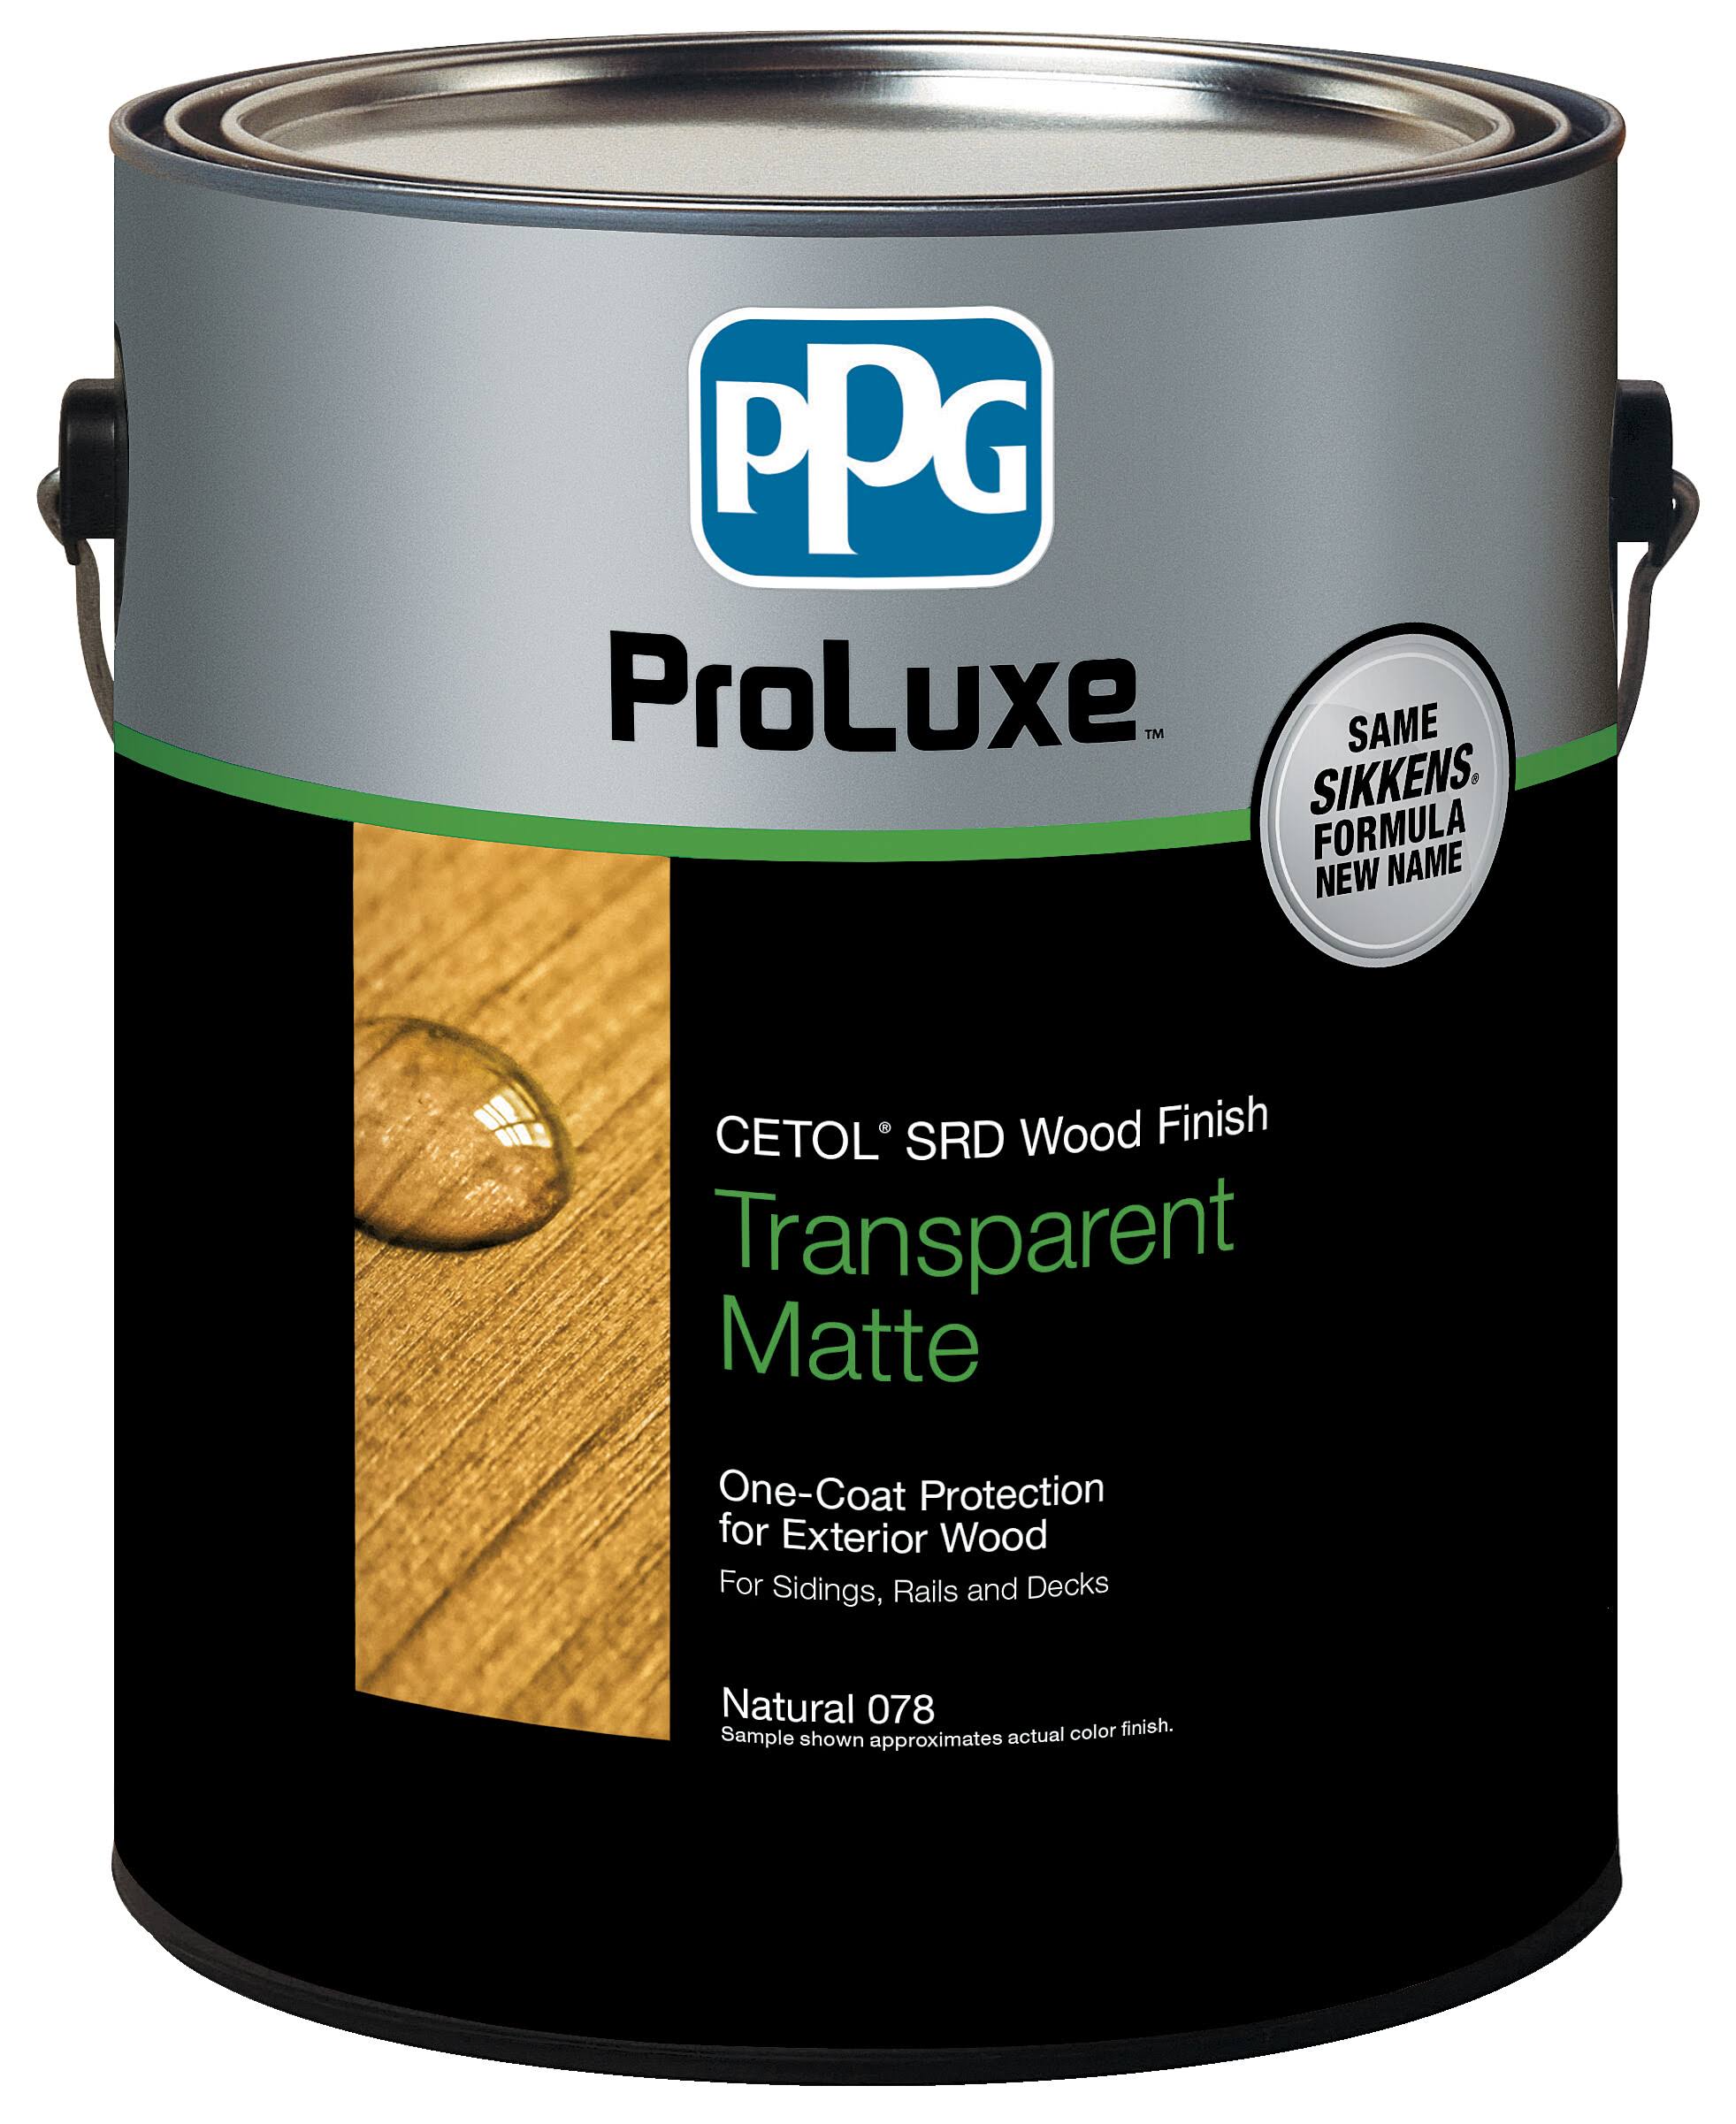 PPG Proluxe Cetol SRD SIK240-005/01 Wood Finish, Natural Oak, 1 Gal